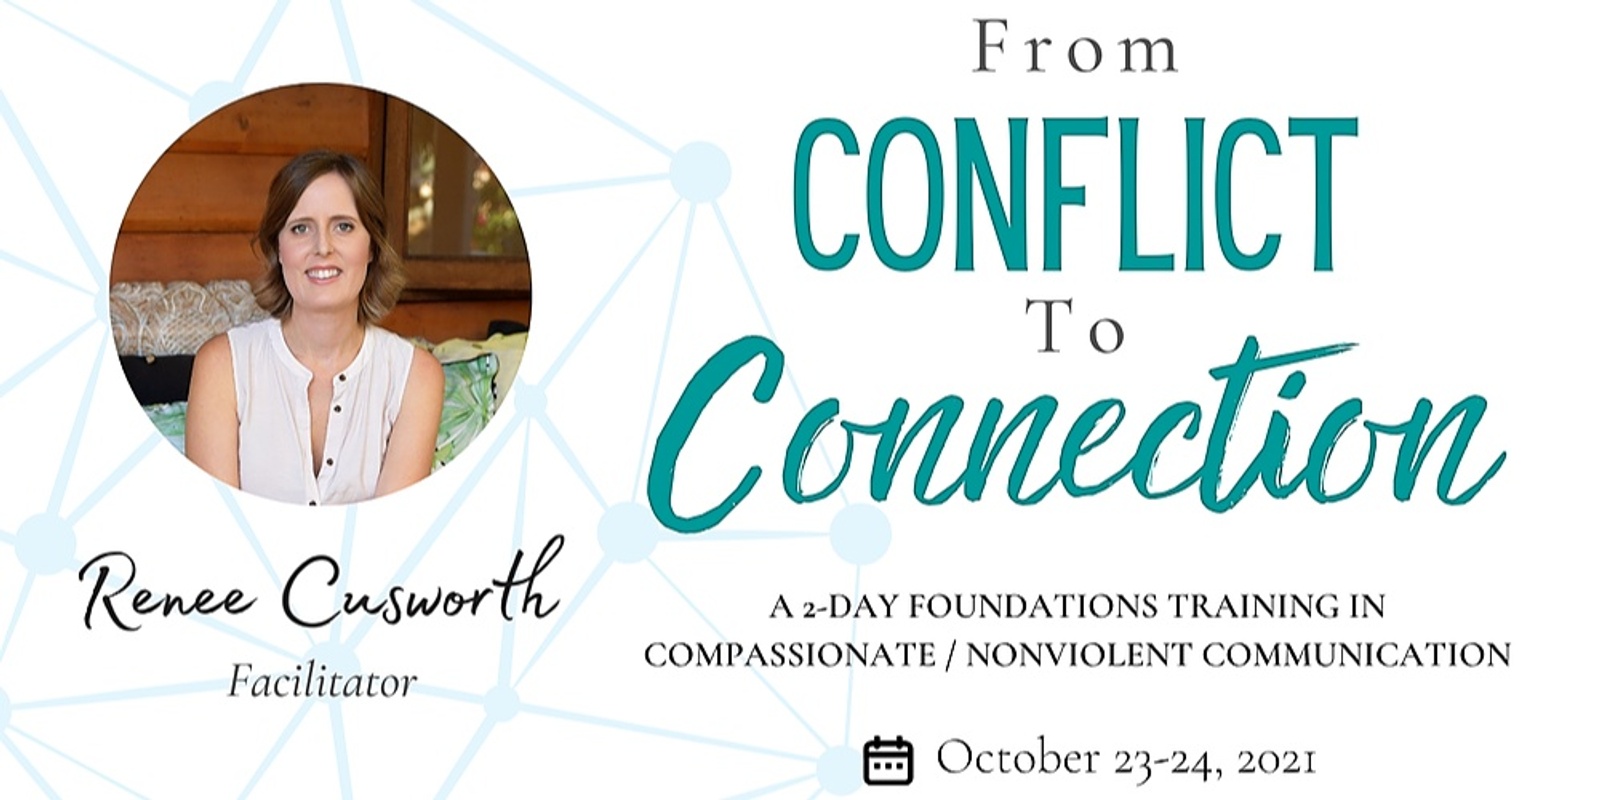 Banner image for From Conflict to Connection: 2 Day Foundations Training in Compassionate/Nonviolent Communication